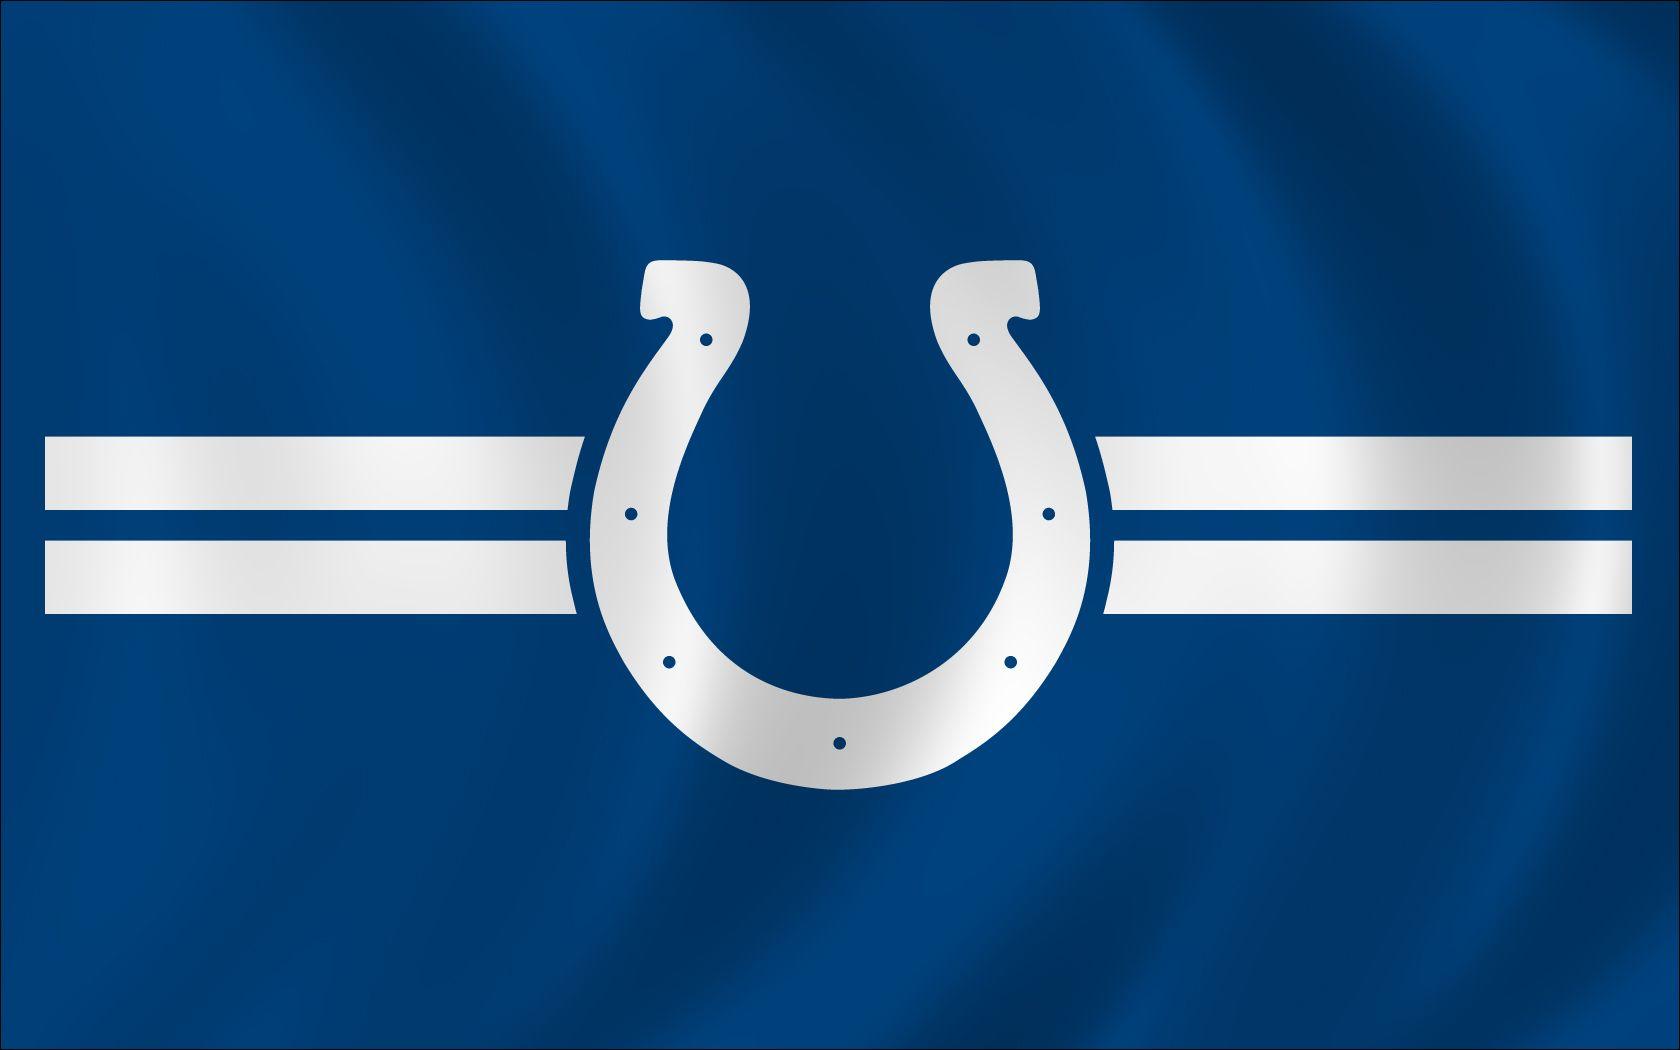 Indianapolis Colts Computer Wallpaper 52931 1680x1050 px